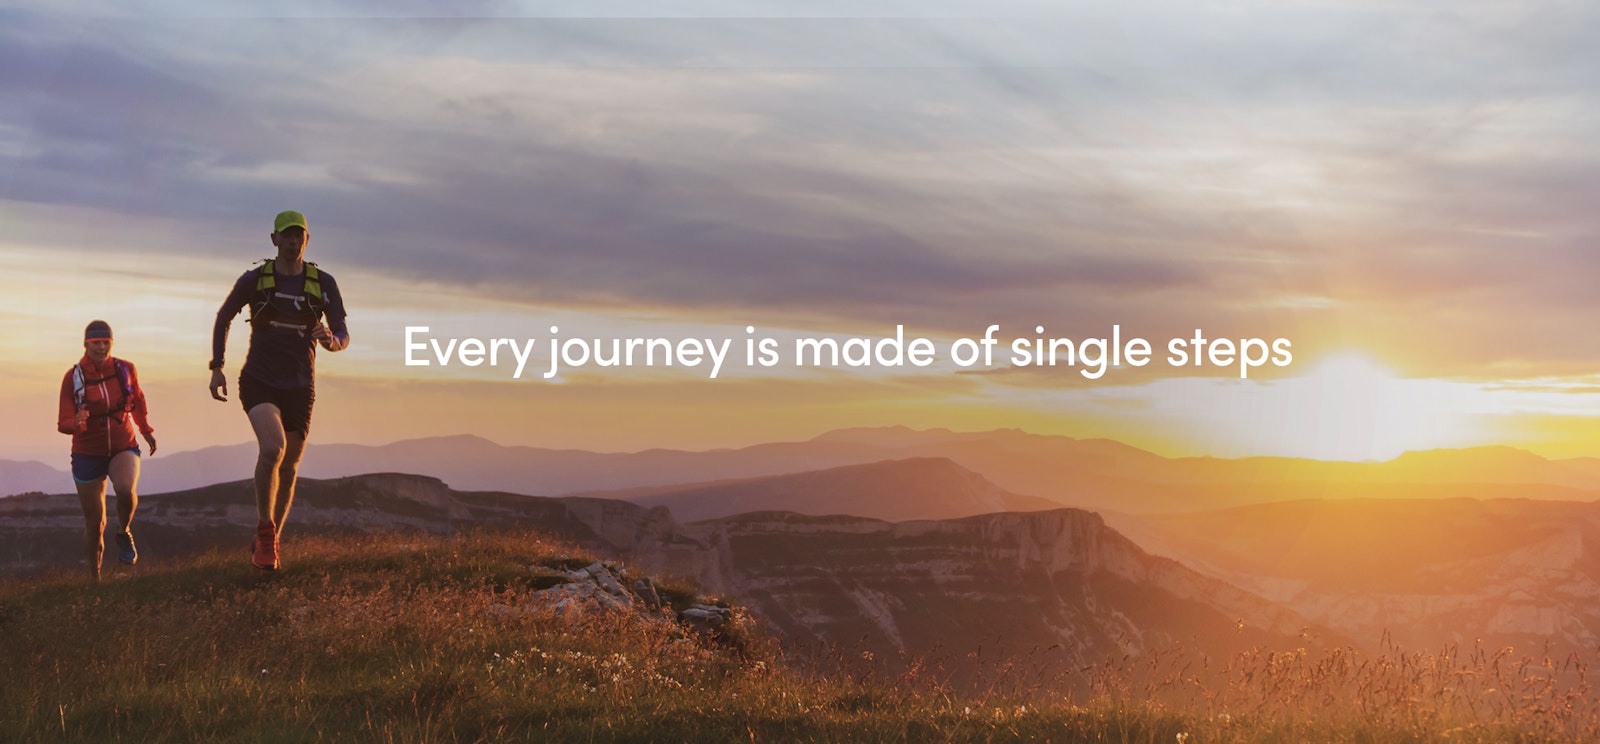 Every journey is made of single steps